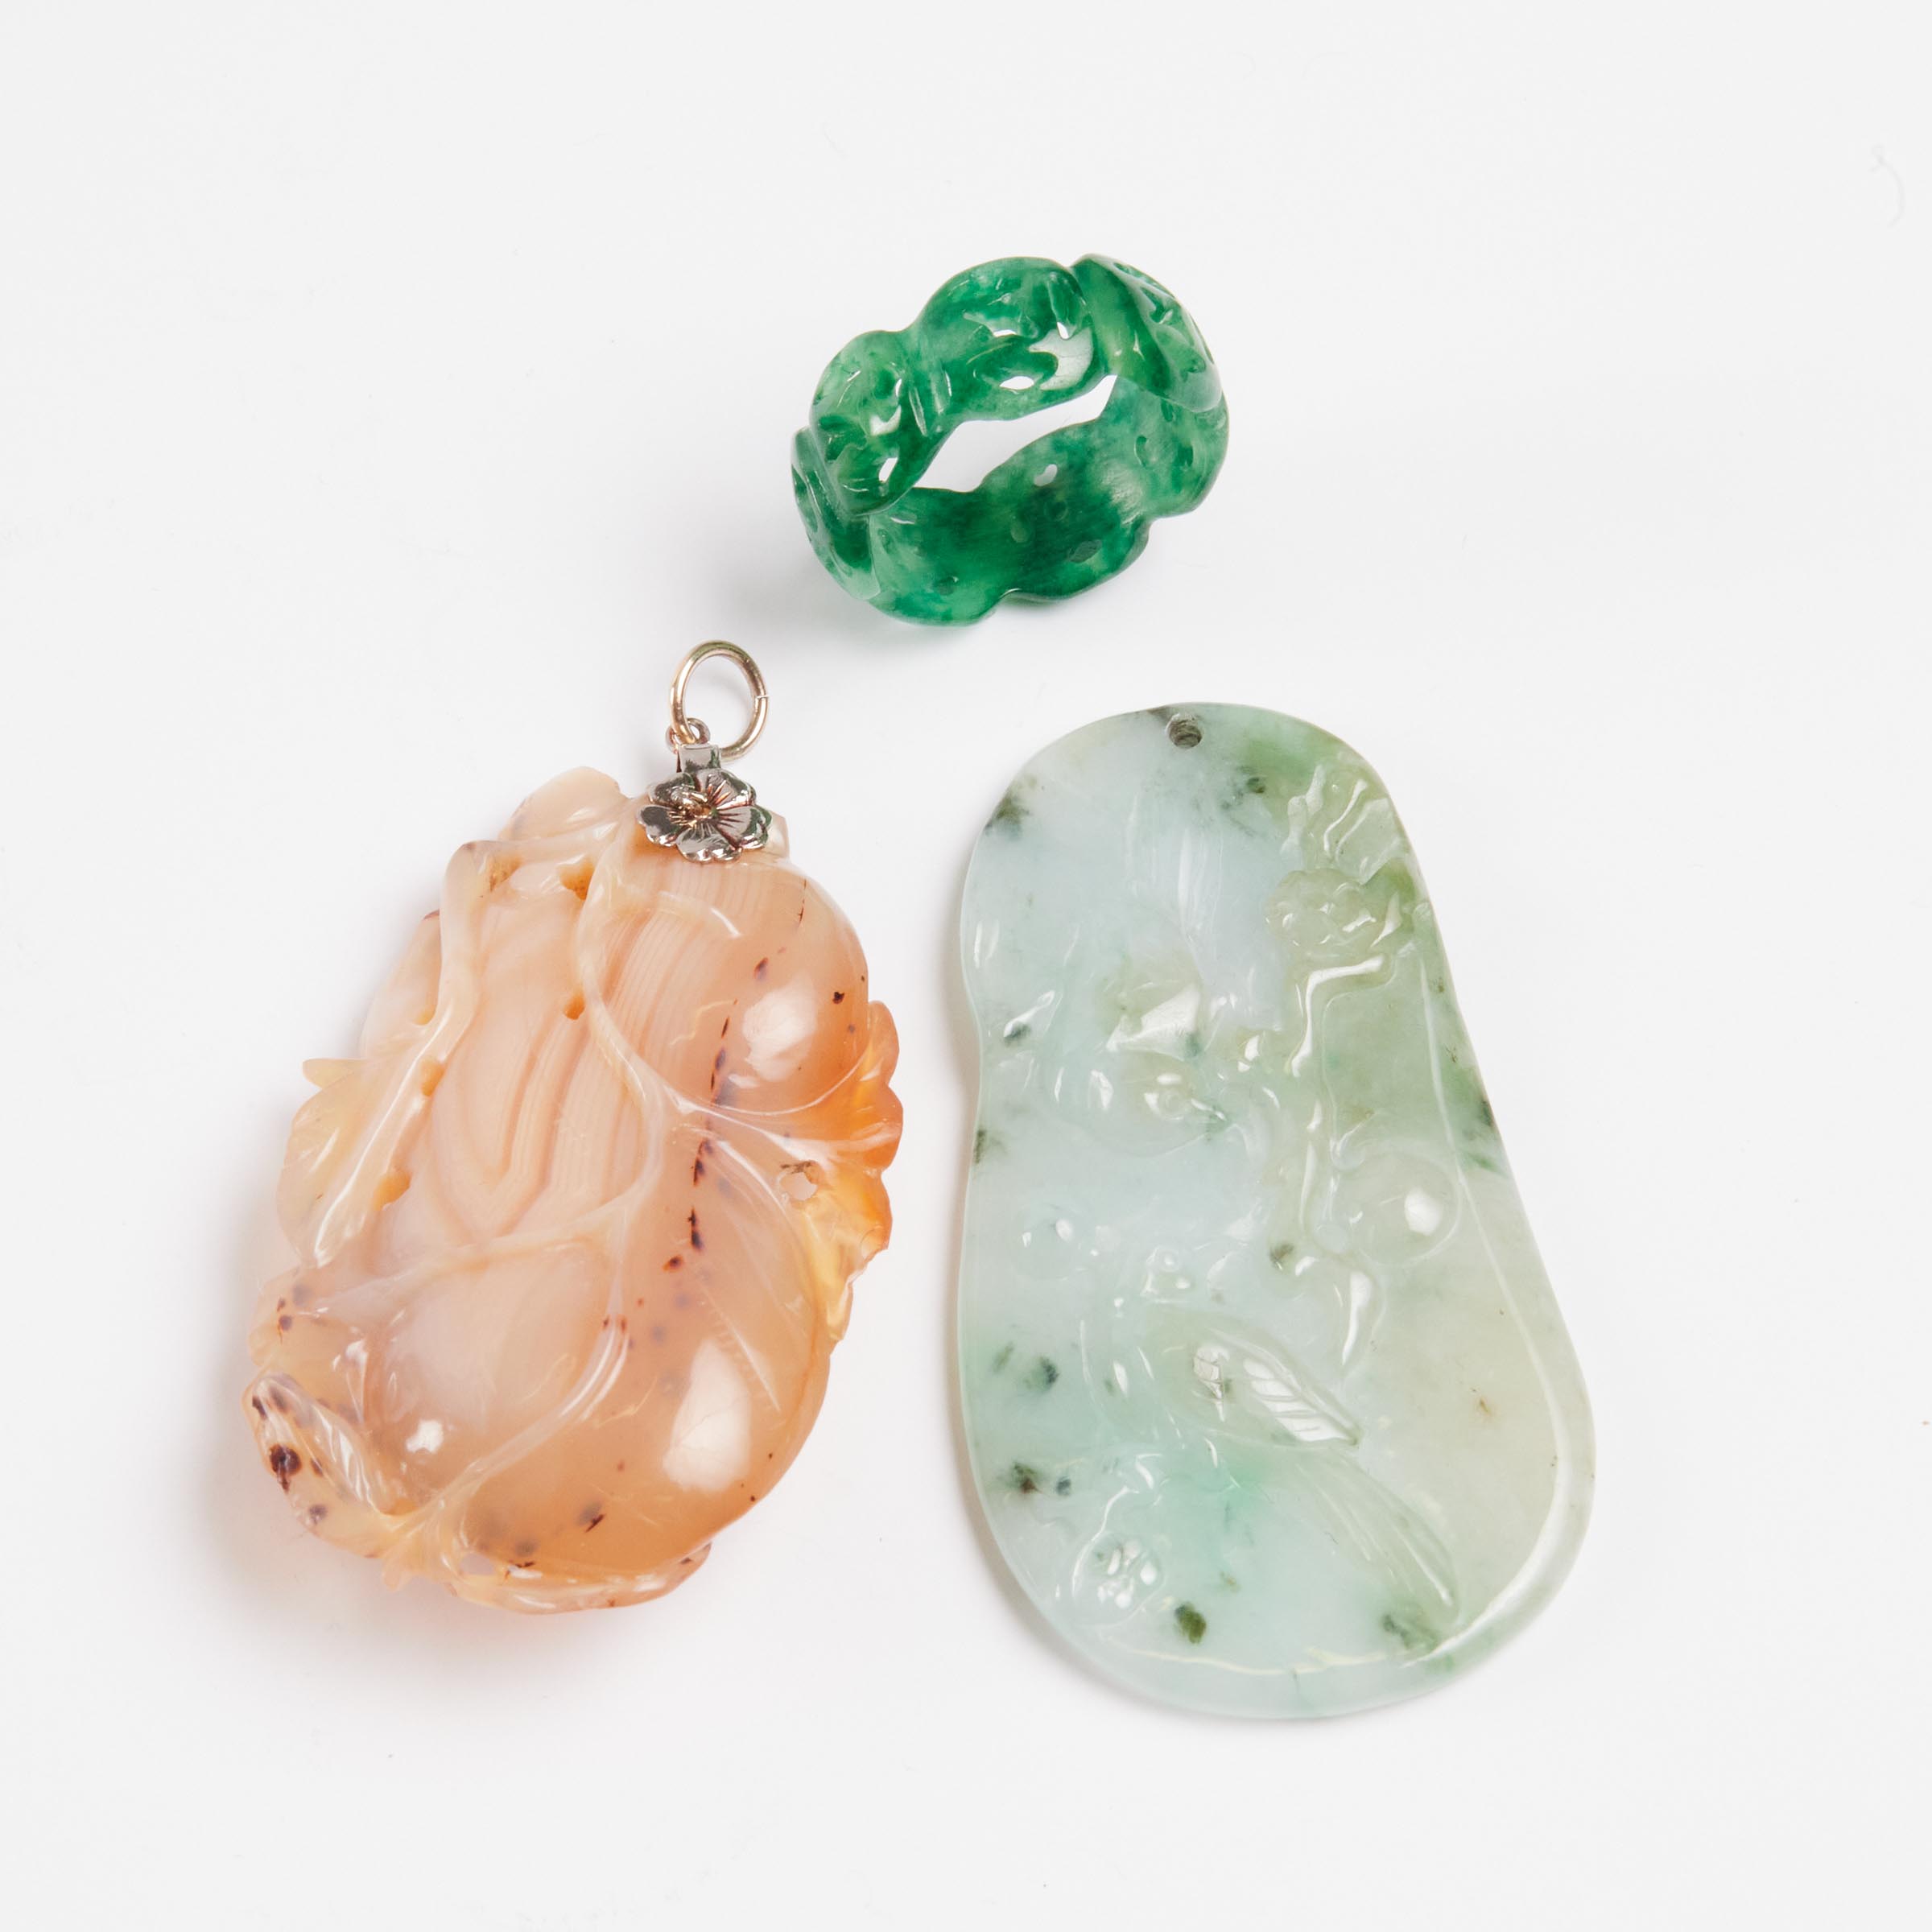 A Carved Agate Pendant, Together